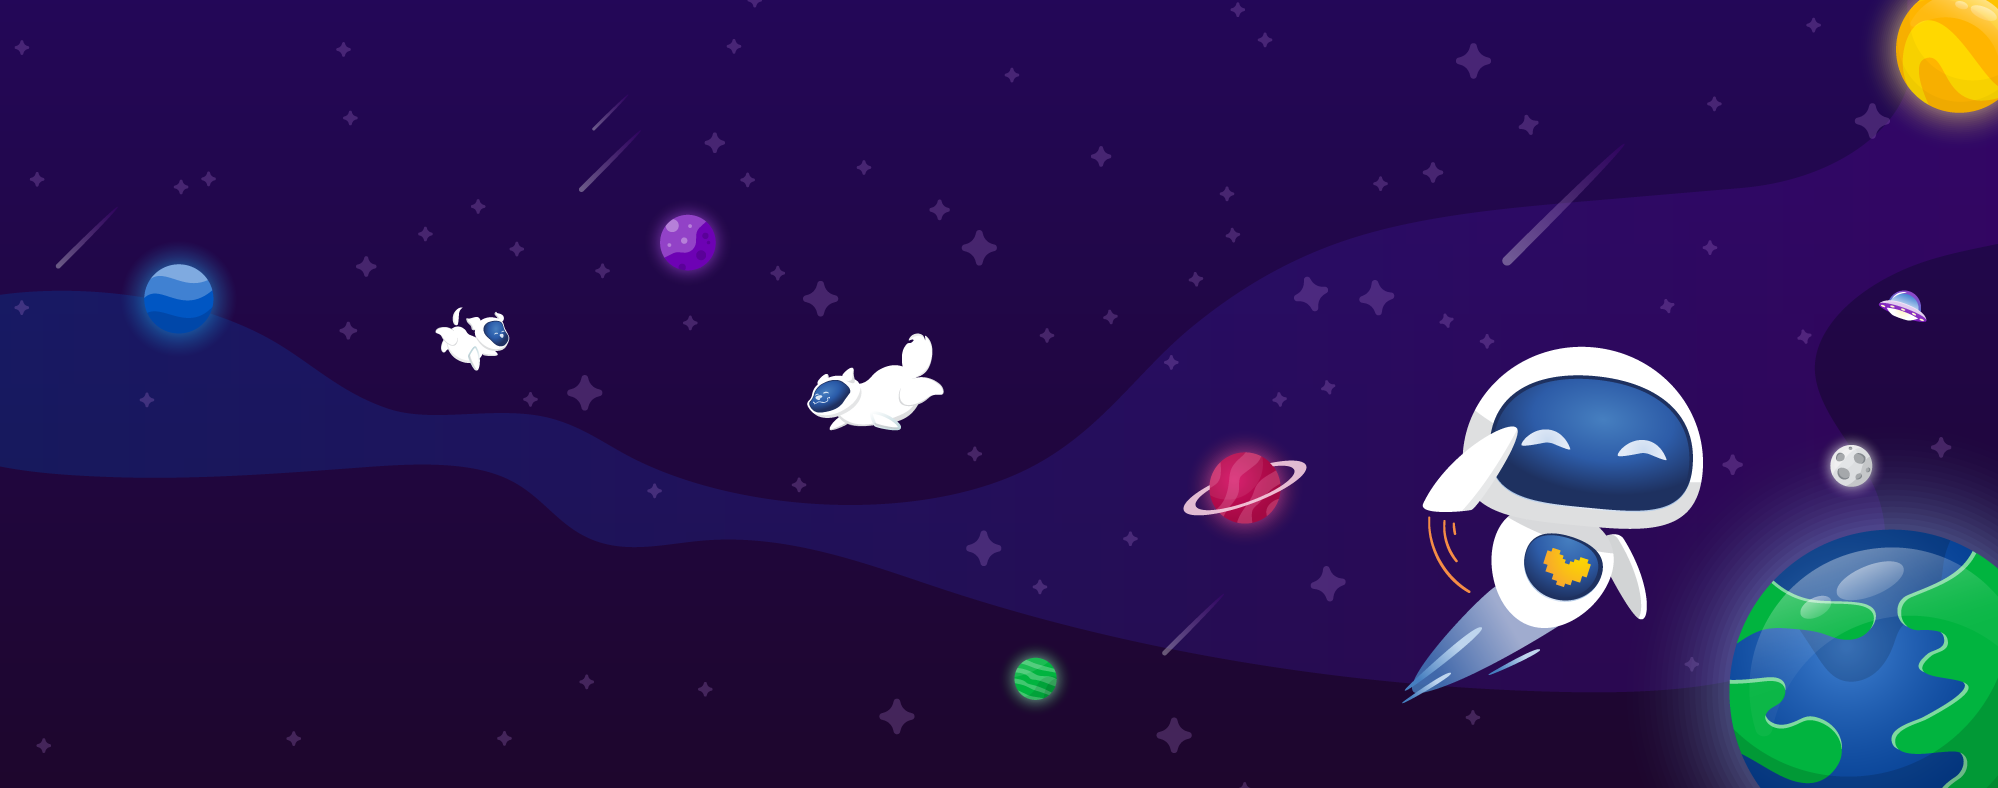 An illustrated space landscape, filled with stars, colorful planets, and shooting stars. Ceemo the robot is flying past the Earth, smiling & saluting at the viewer. His two robot dog friends are floating peacefully through space, chasing planets.